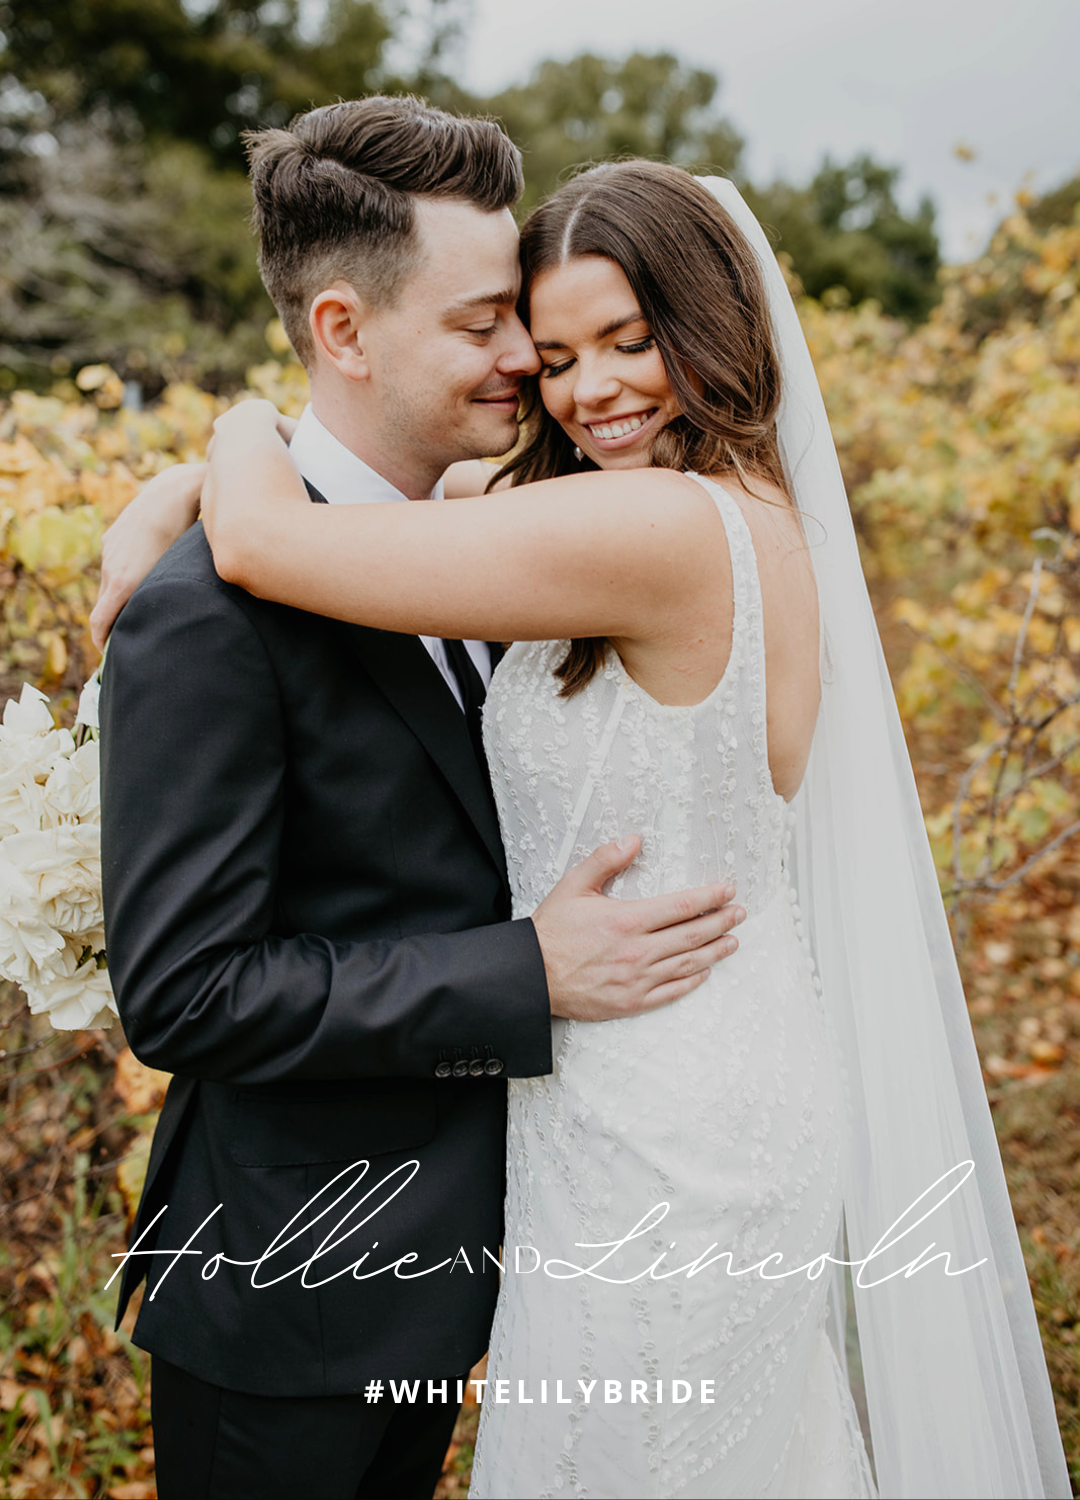 The bride becomes the bridal consultant: Hollie & Lincoln